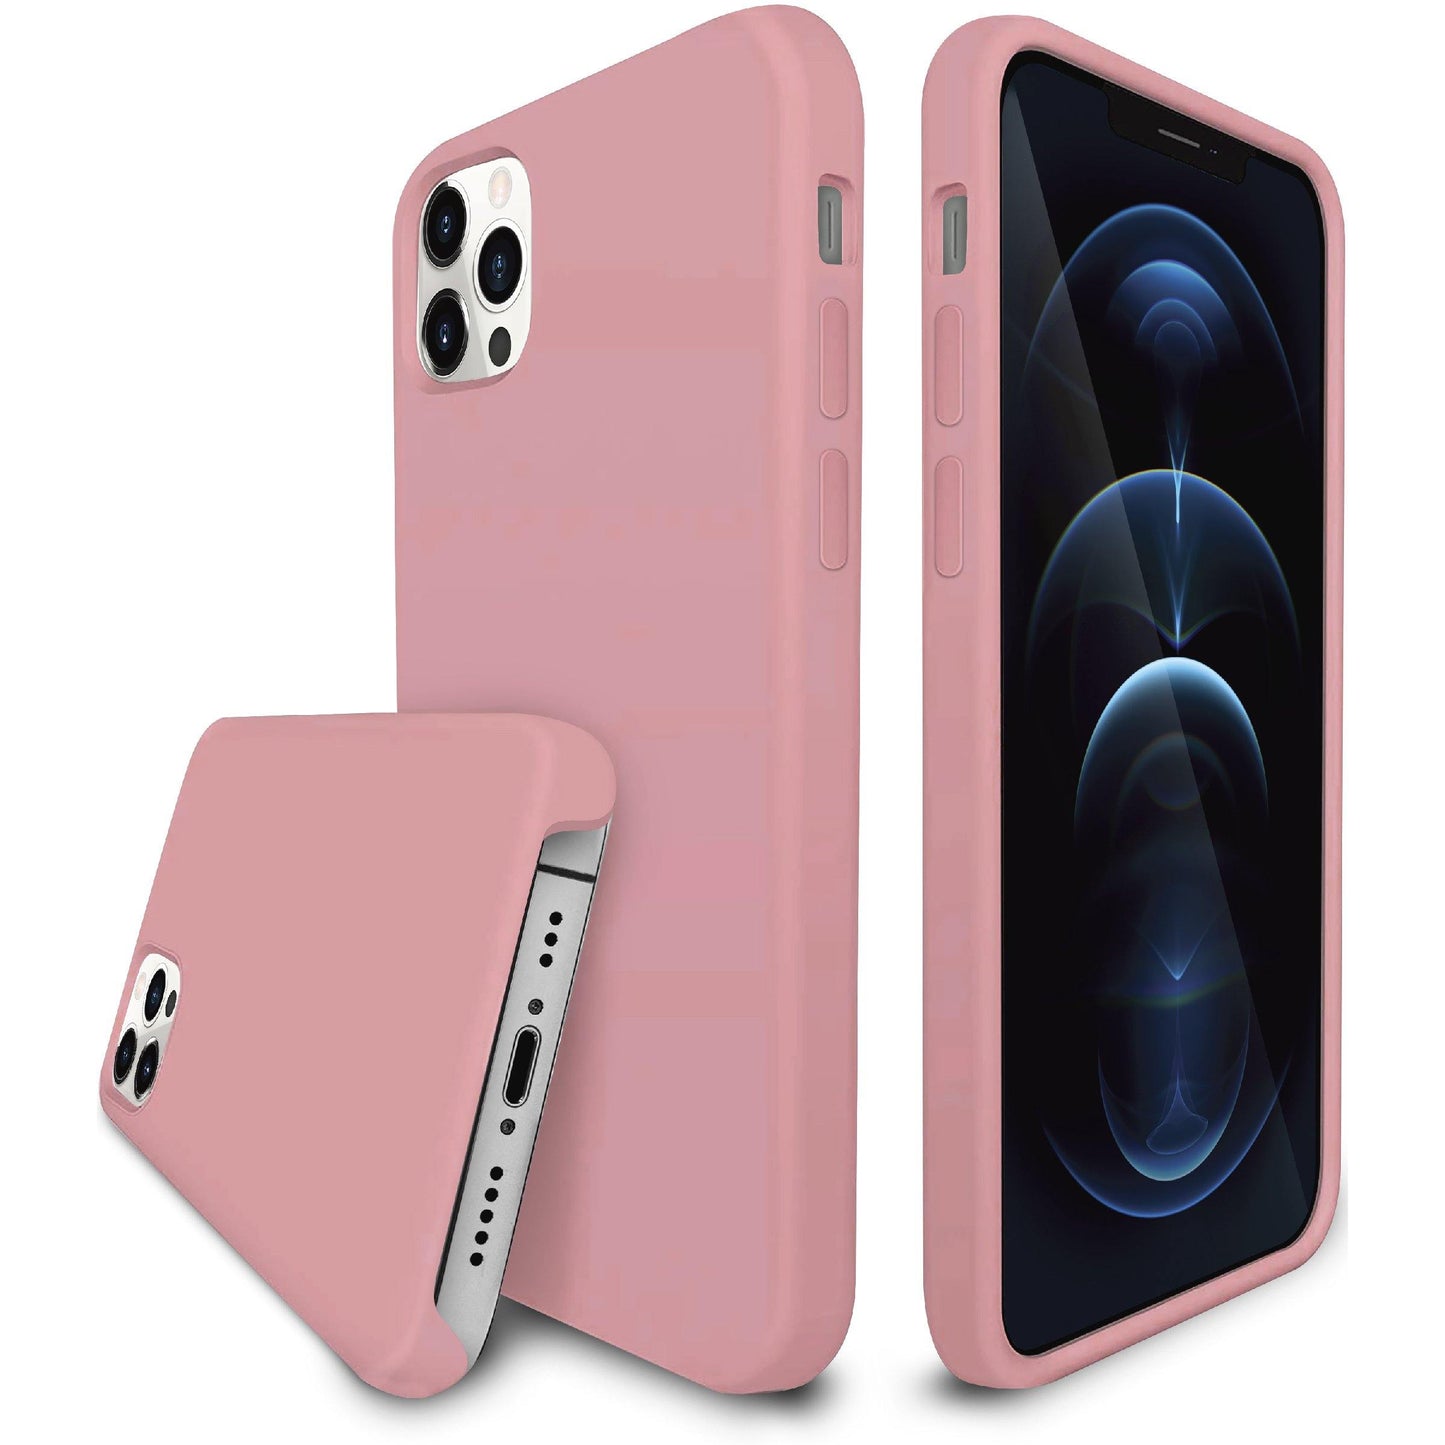 Silicone Case for iPhone 12 / 12 Pro 6.1-inch, Slim Fit Shockproof Protective Rubber Phone Cover - Case Yard USA